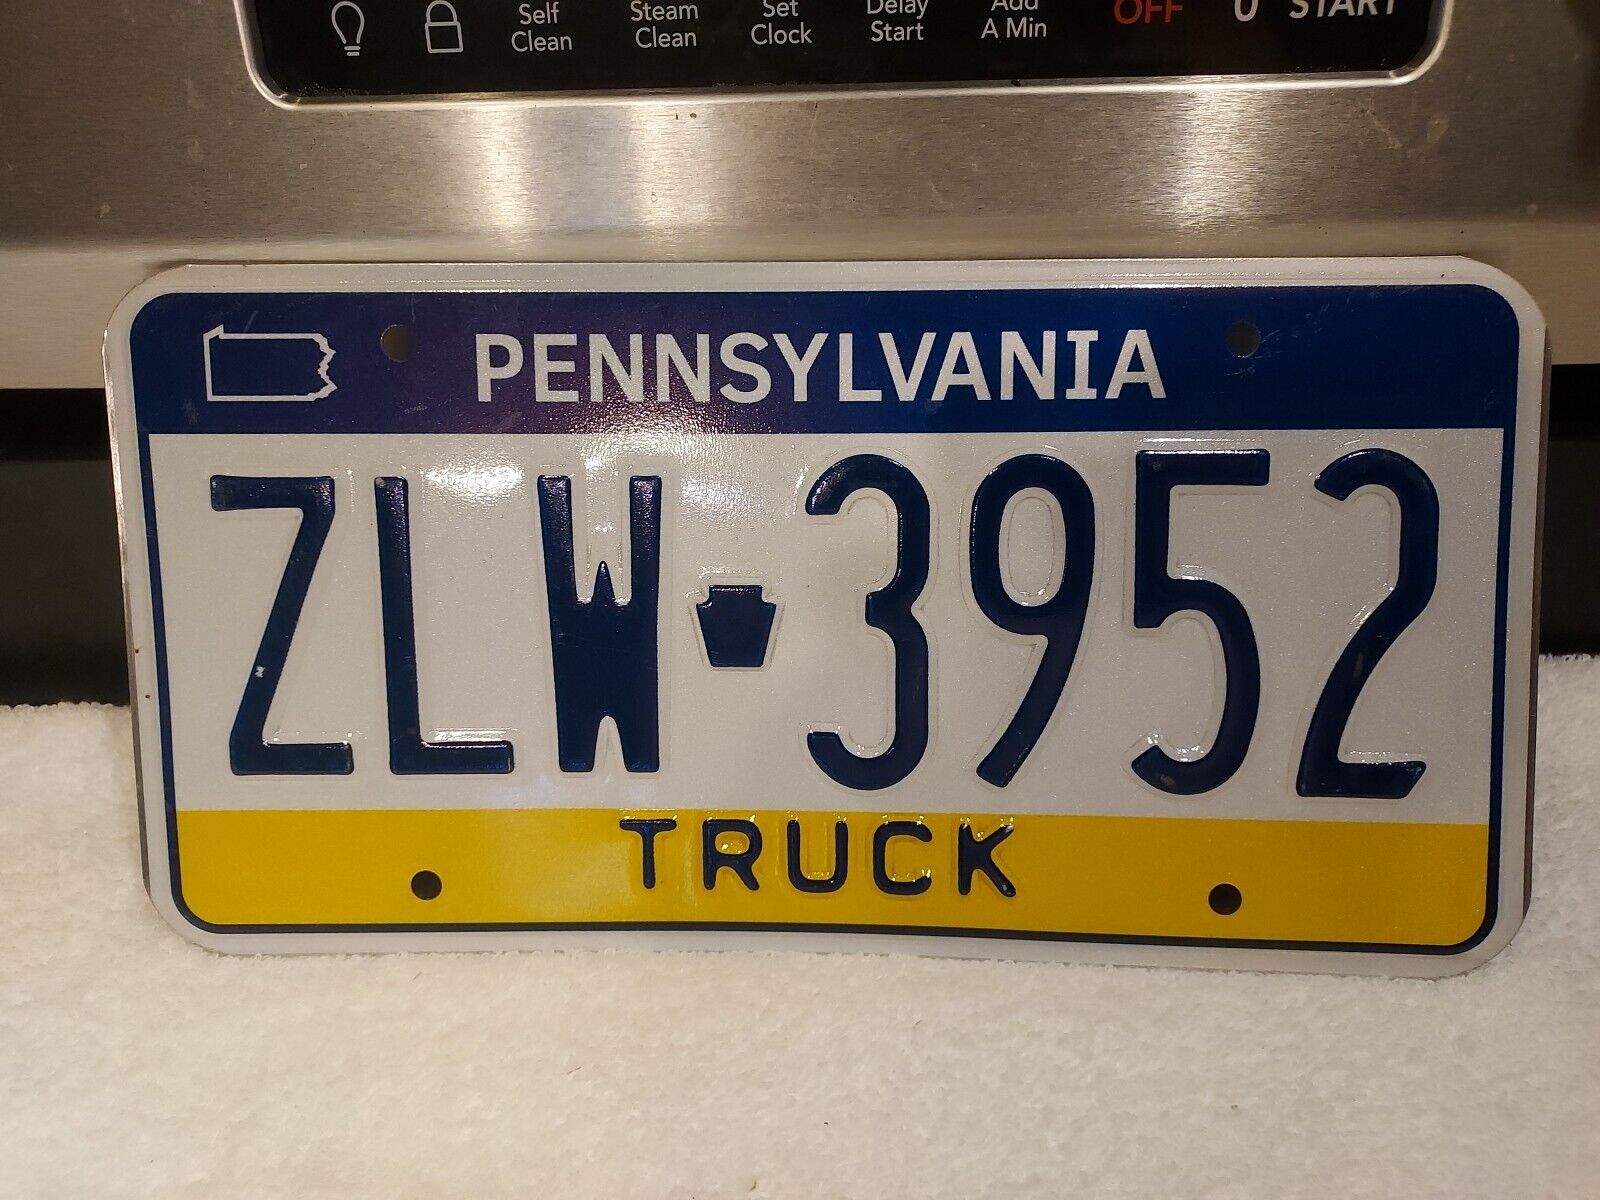 2018 Pennsylvania TRUCK License Plate ZLW-3952 Very Clean Lite Use